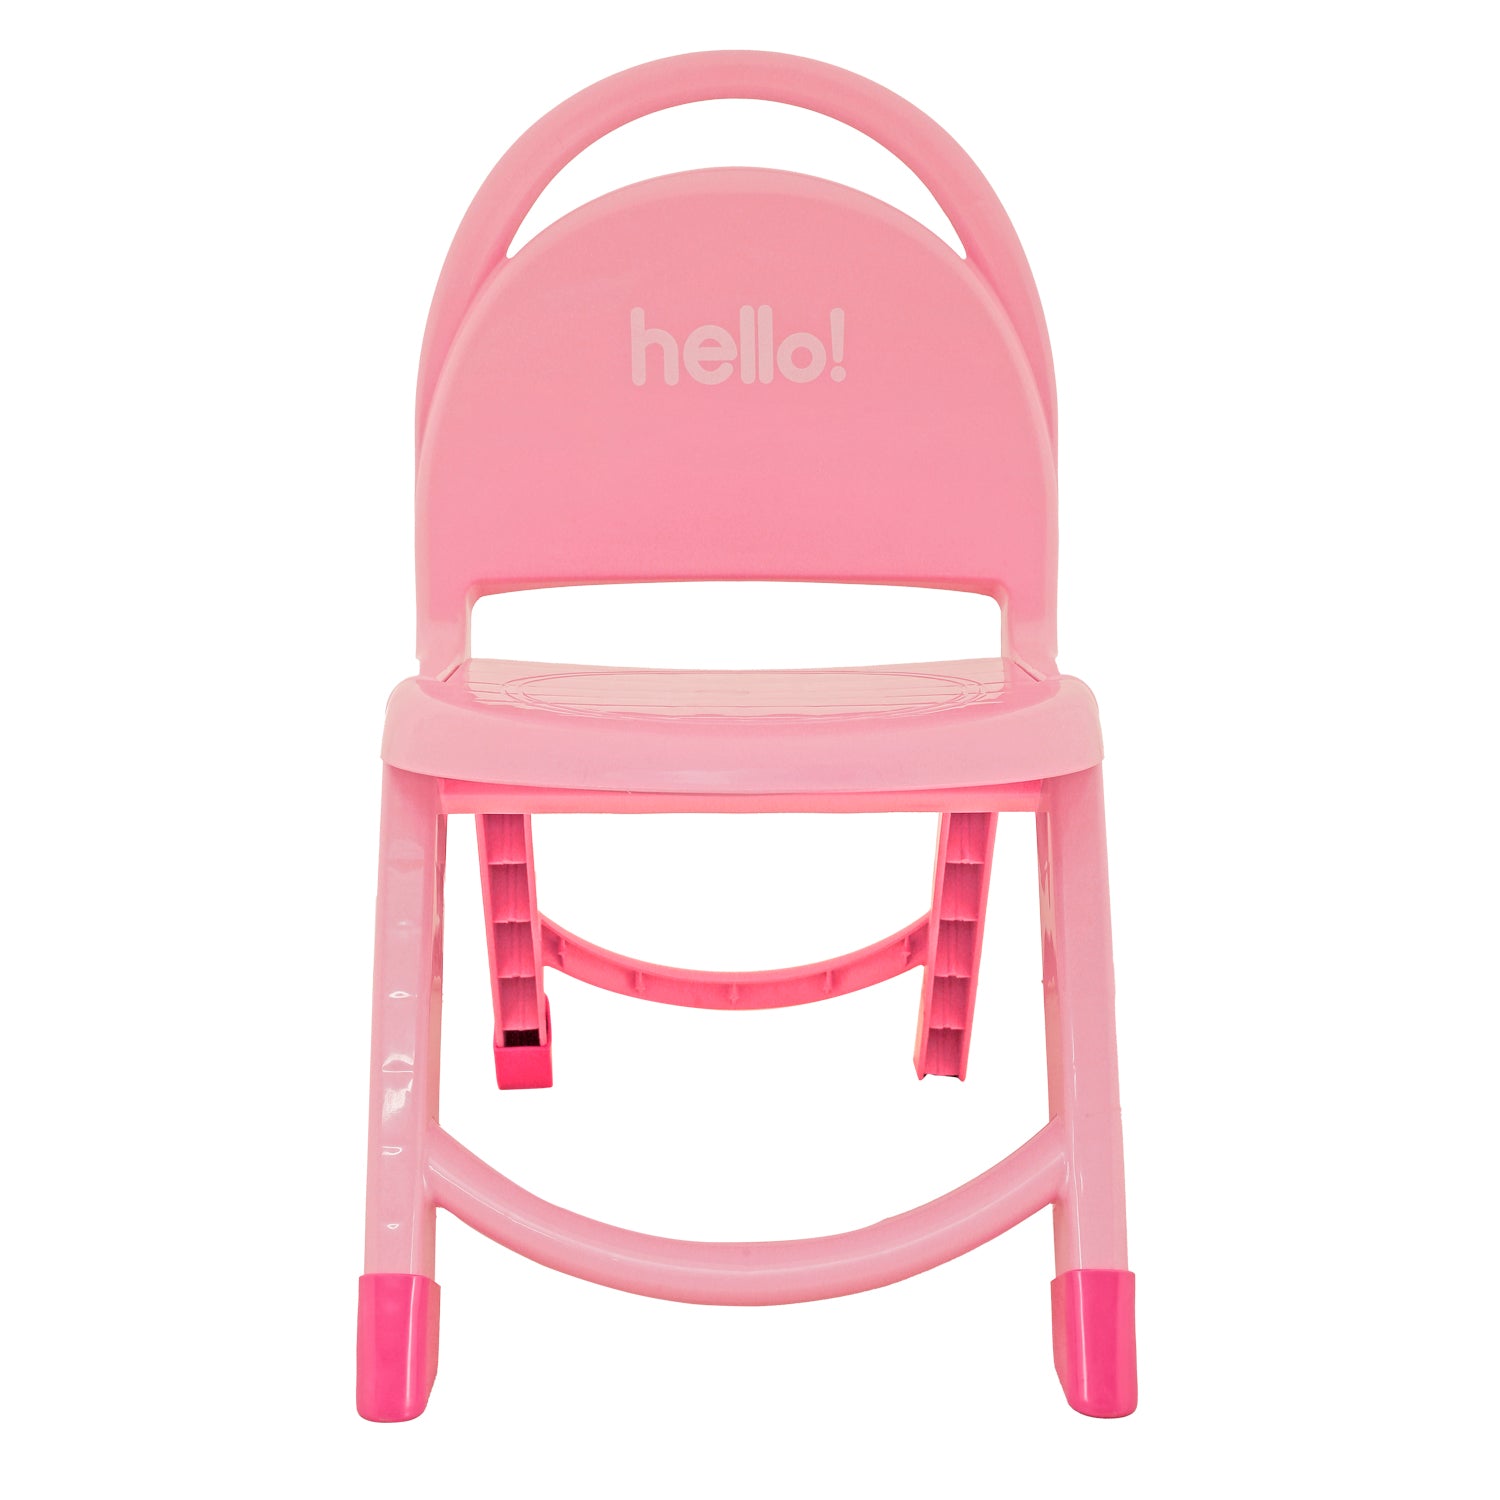 Foldable Multipurpose Pink Chair